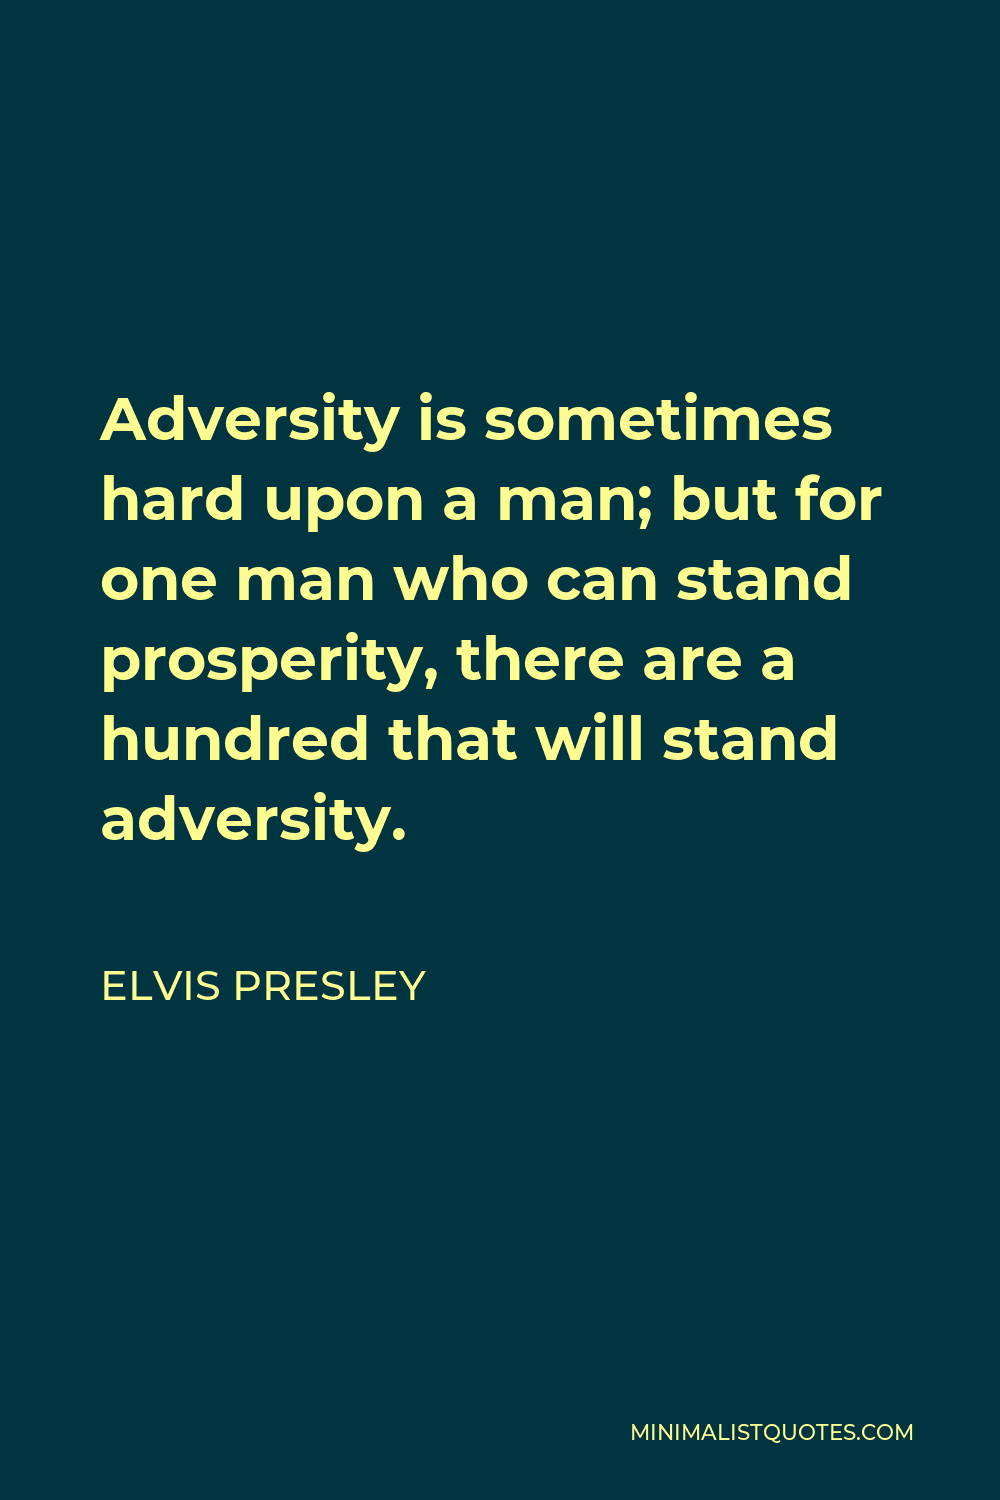 Elvis Presley Quote - Adversity is sometimes hard upon a man; but for one man who can stand prosperity, there are a hundred that will stand adversity.